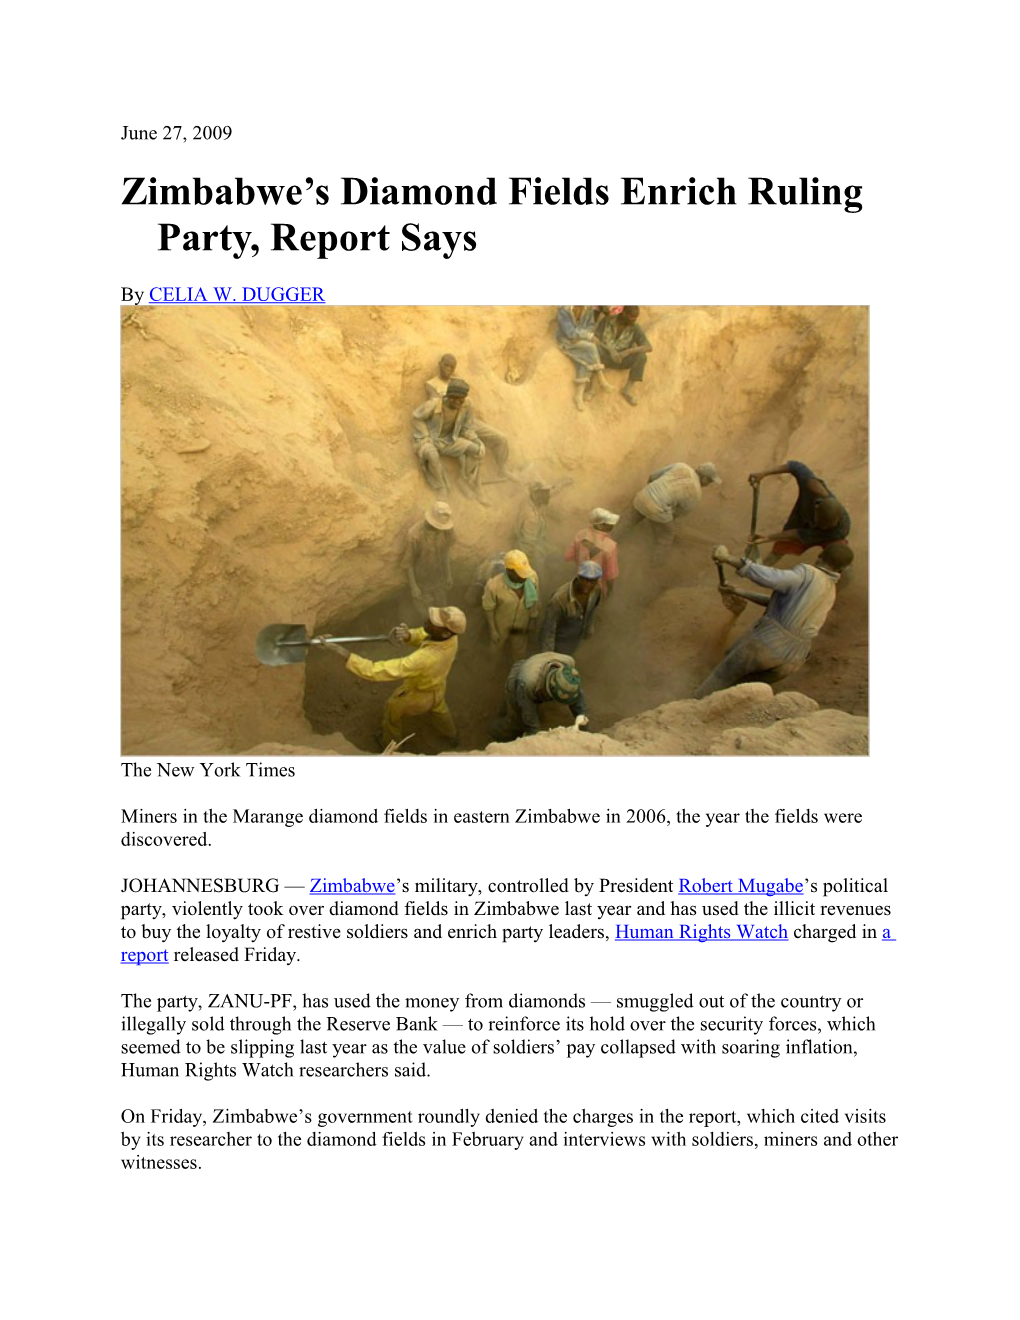 Zimbabwe S Diamond Fields Enrich Ruling Party, Report Says